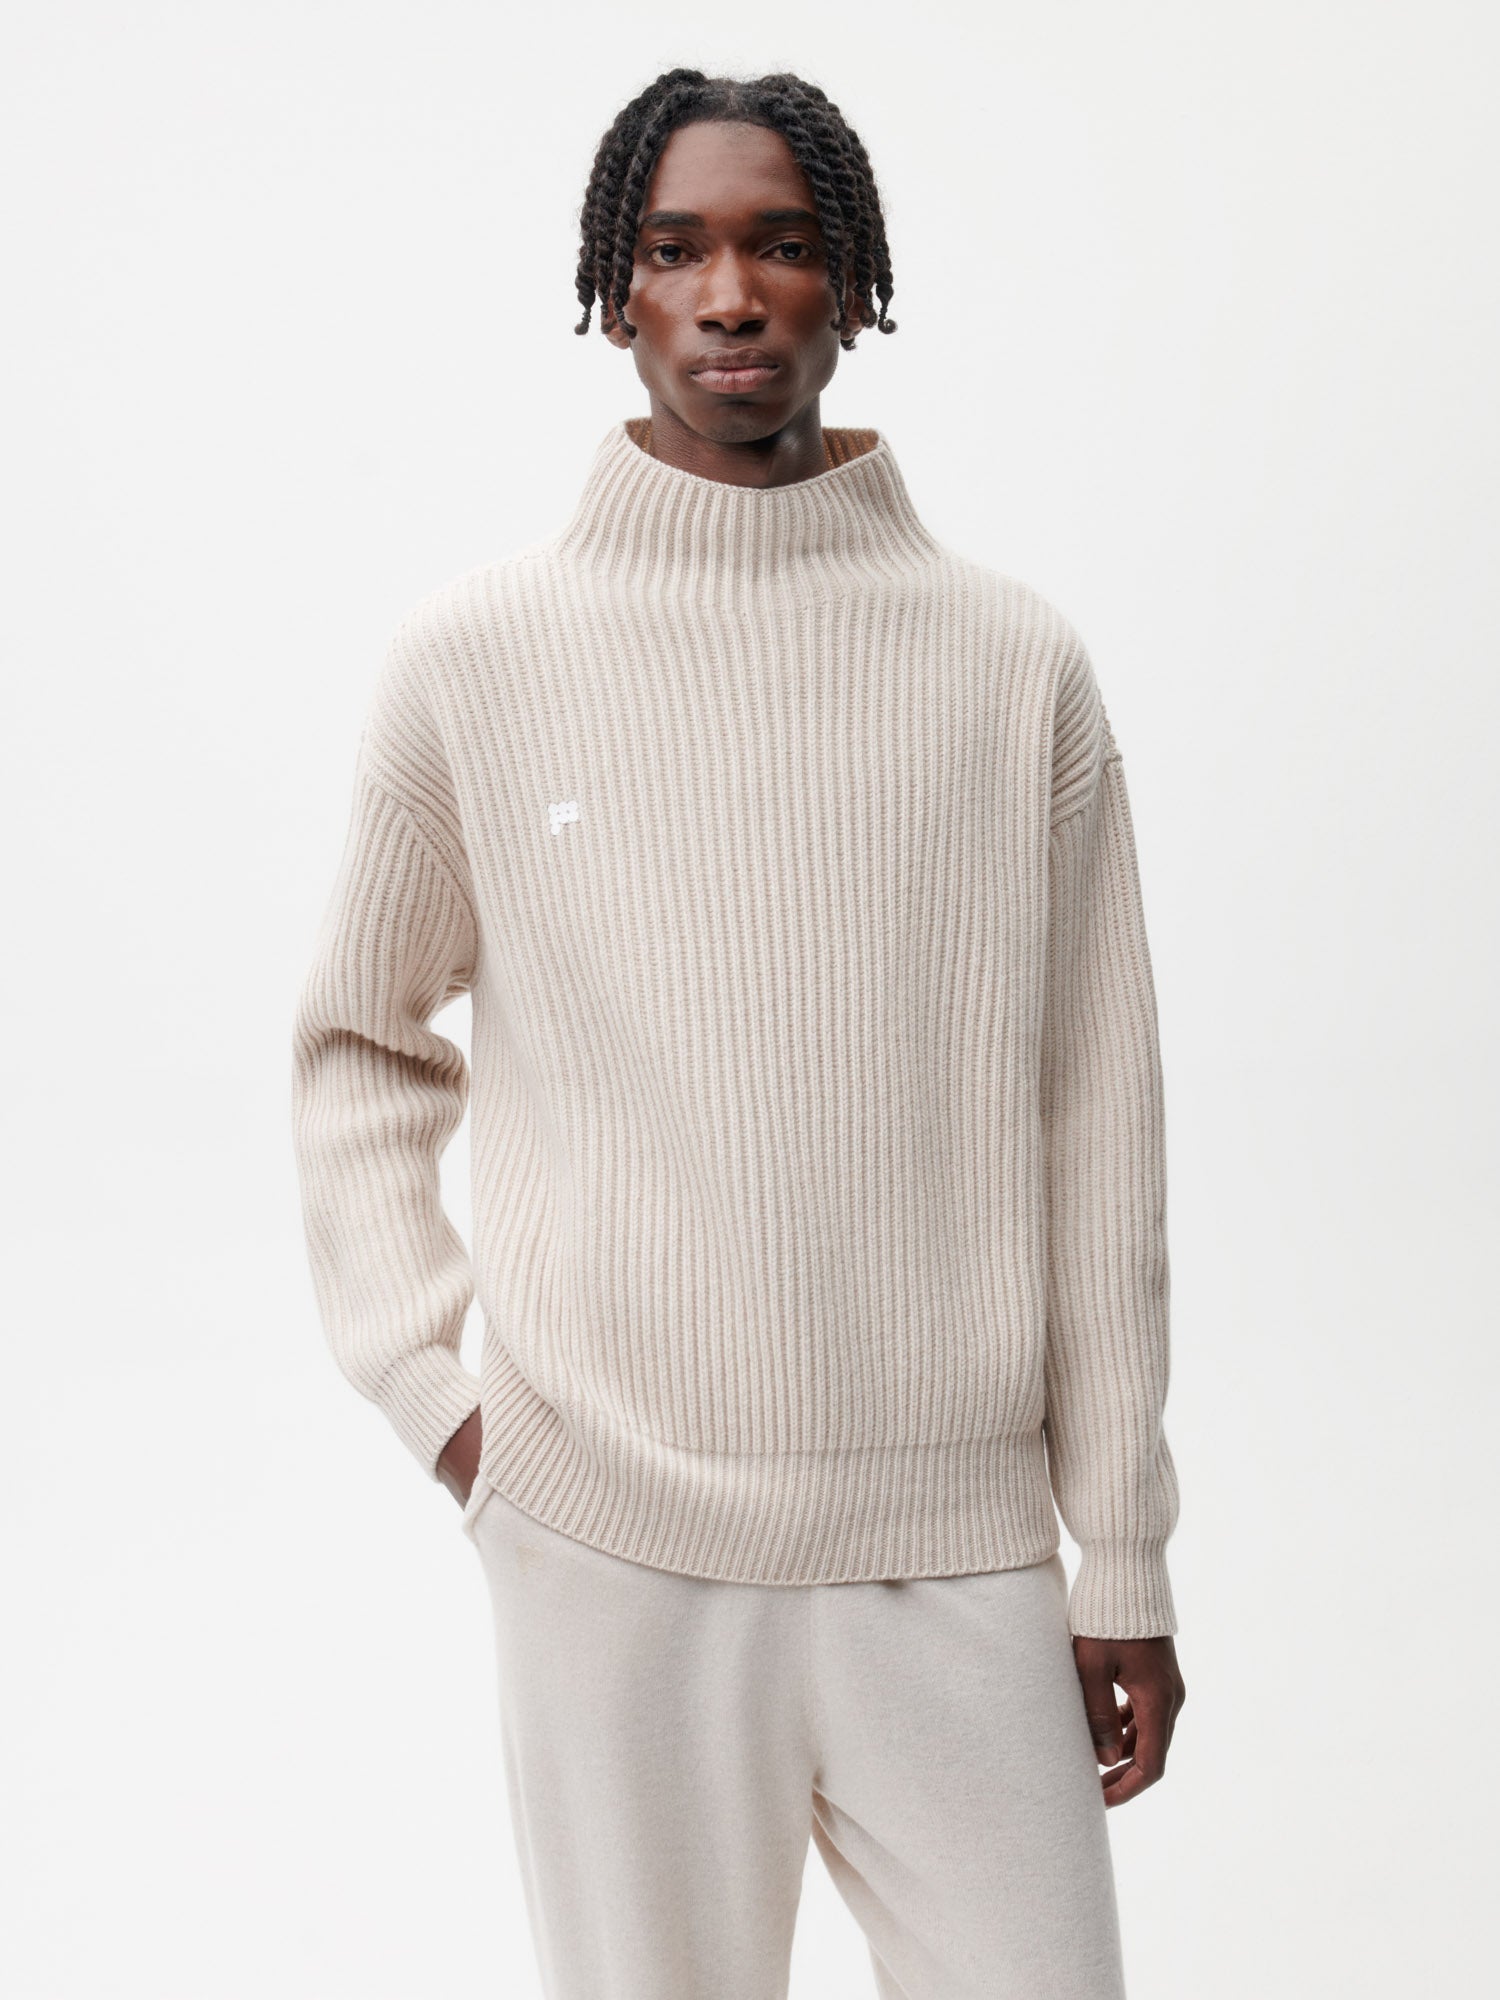    Recycled-Cashmere-Funnel-Neck-Jumper-Oatmeal-Male-1